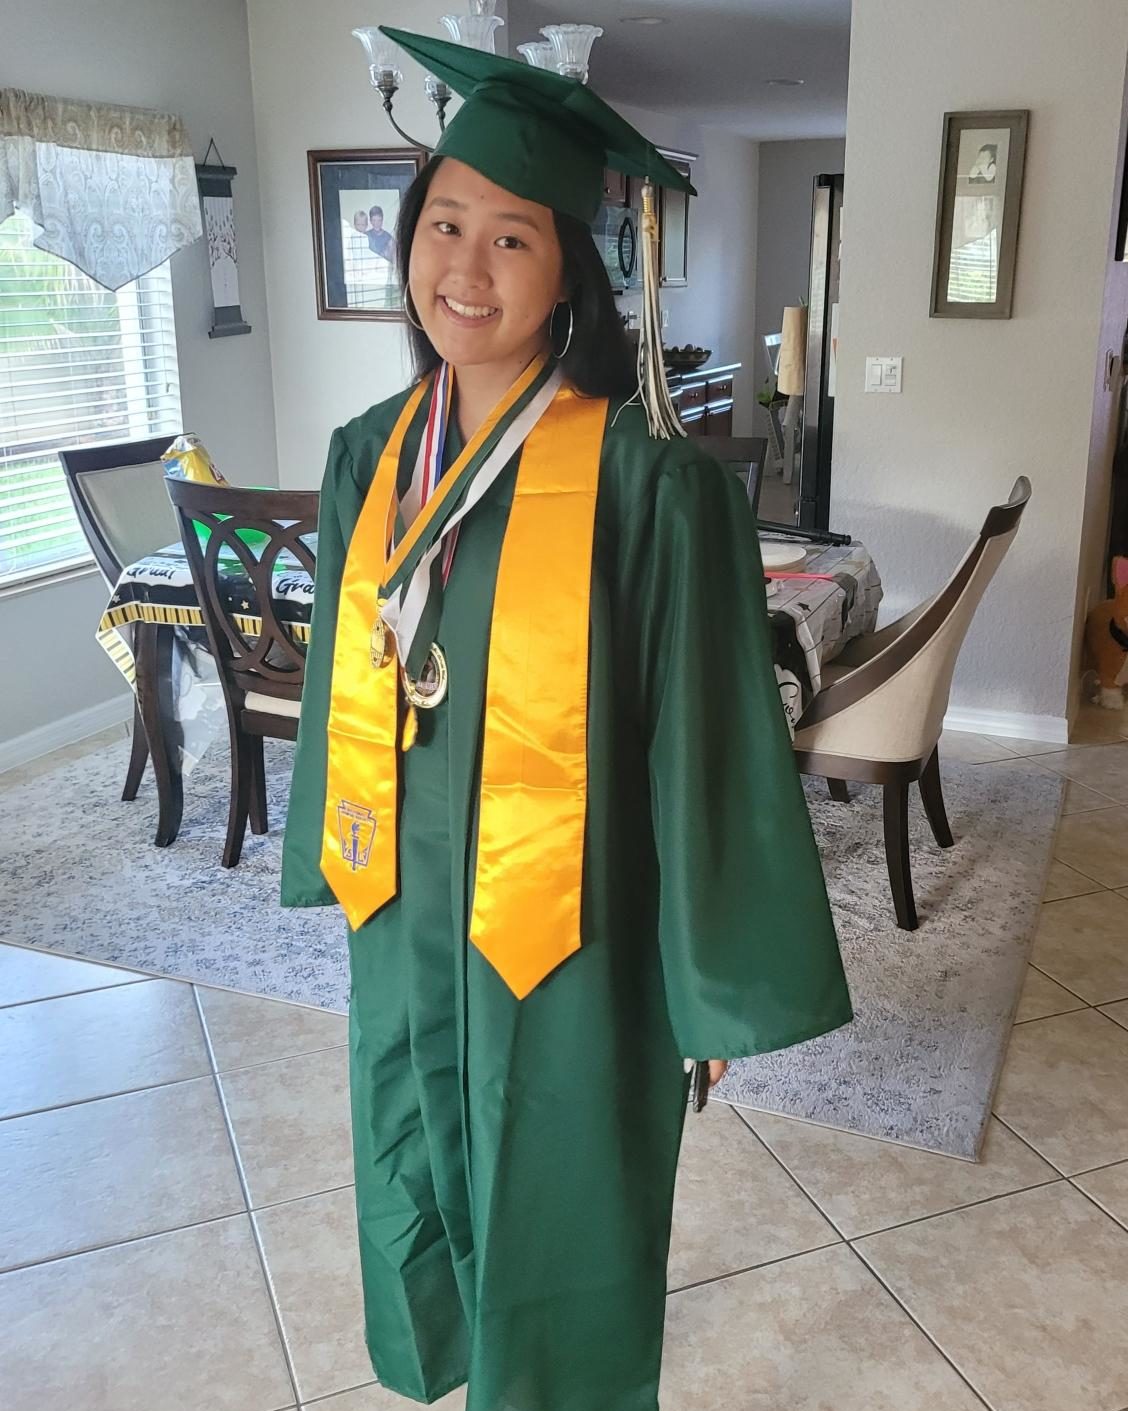 smiling girl standing in dining room wearing green graduation cap and gown